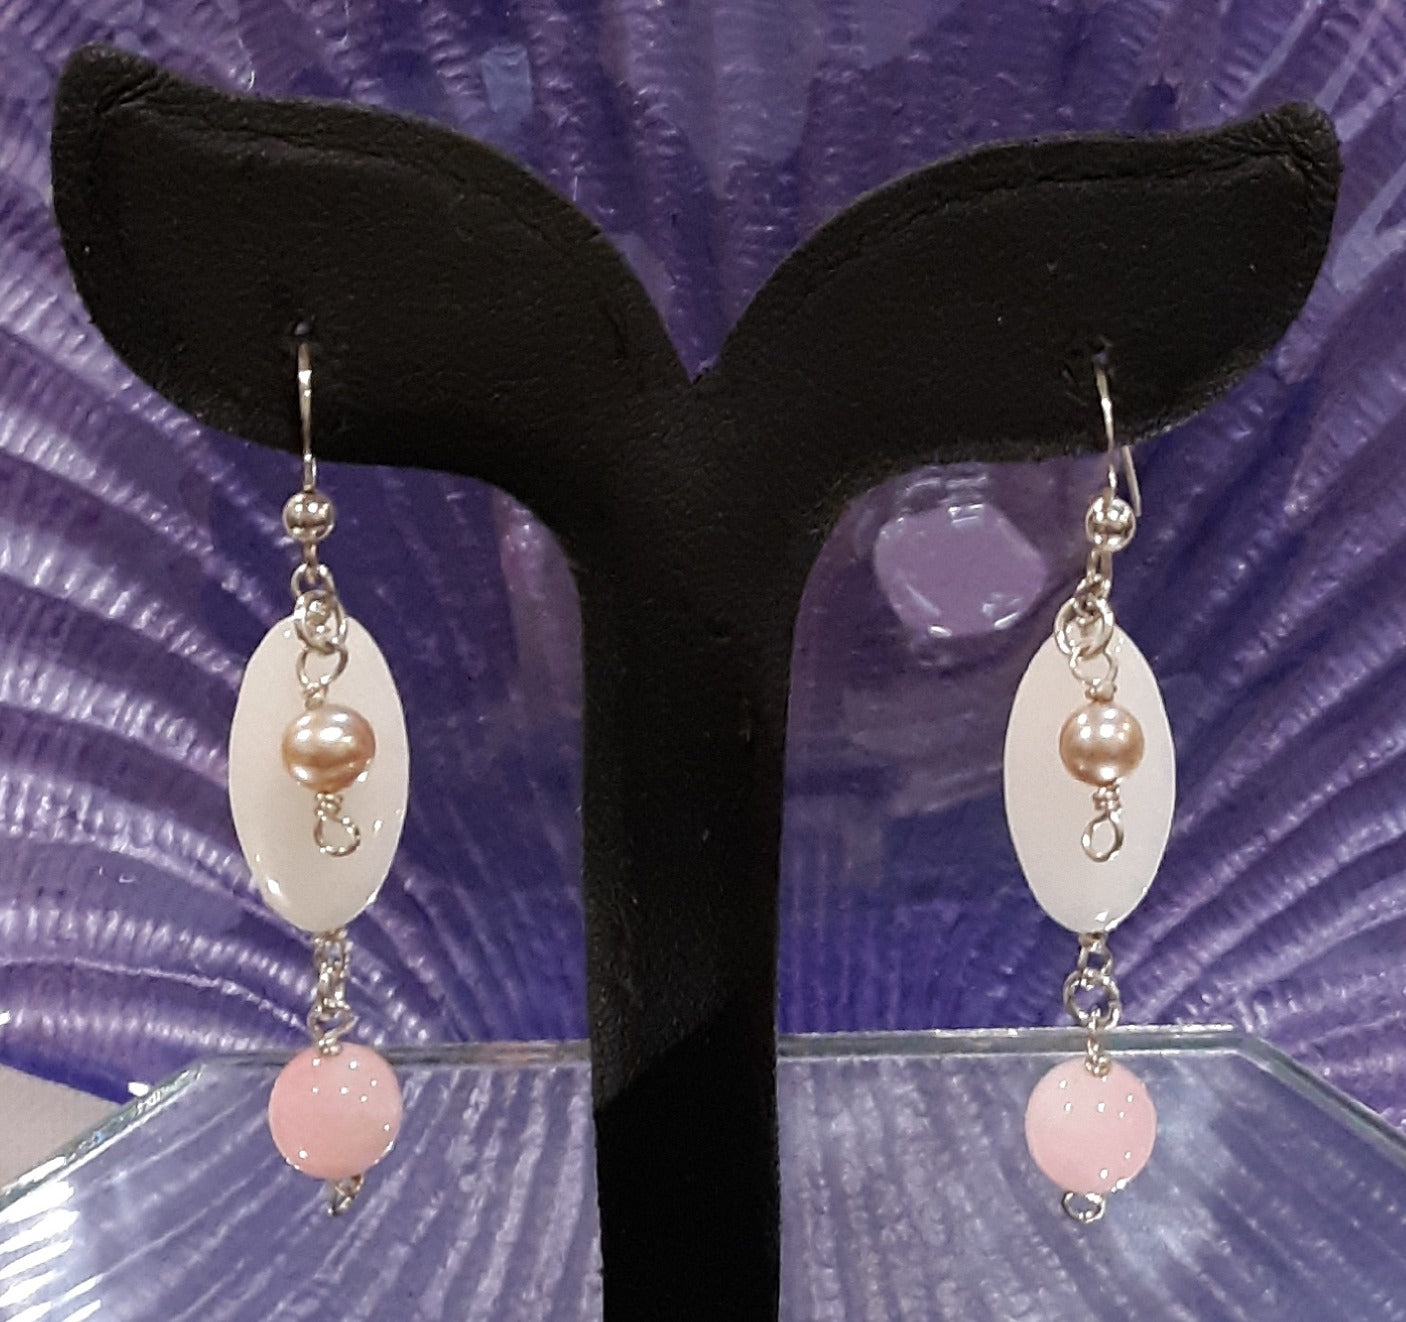 White Agate, Pink Pearl, and Round Polished Kunzite Bead Sterling Silver Dangle Earrings Approx. 2 1/16"